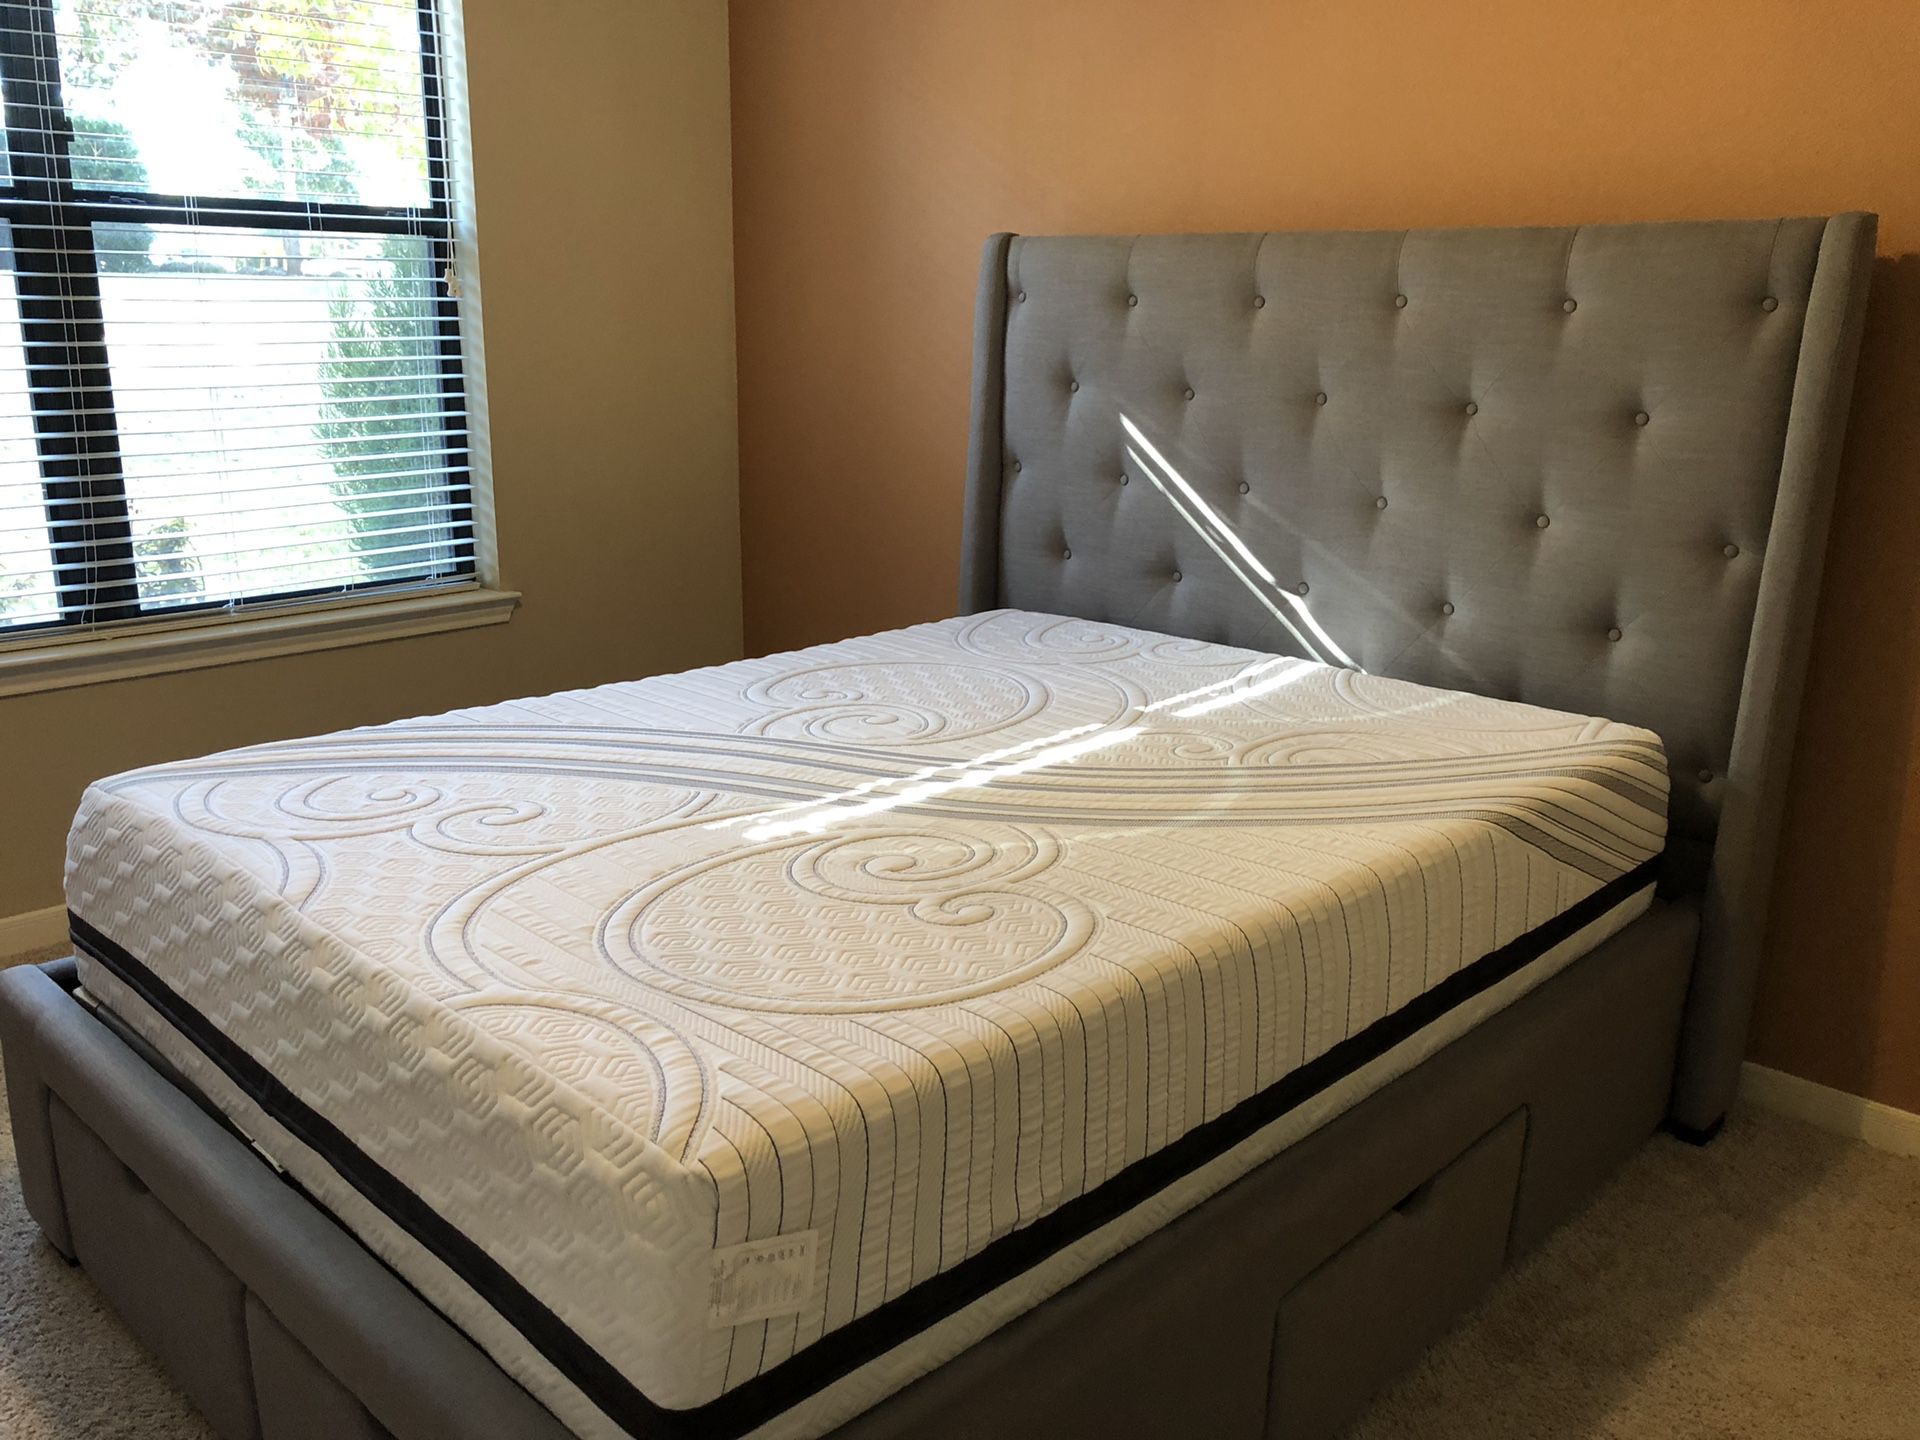 Icomfort queen mattress and bed frame